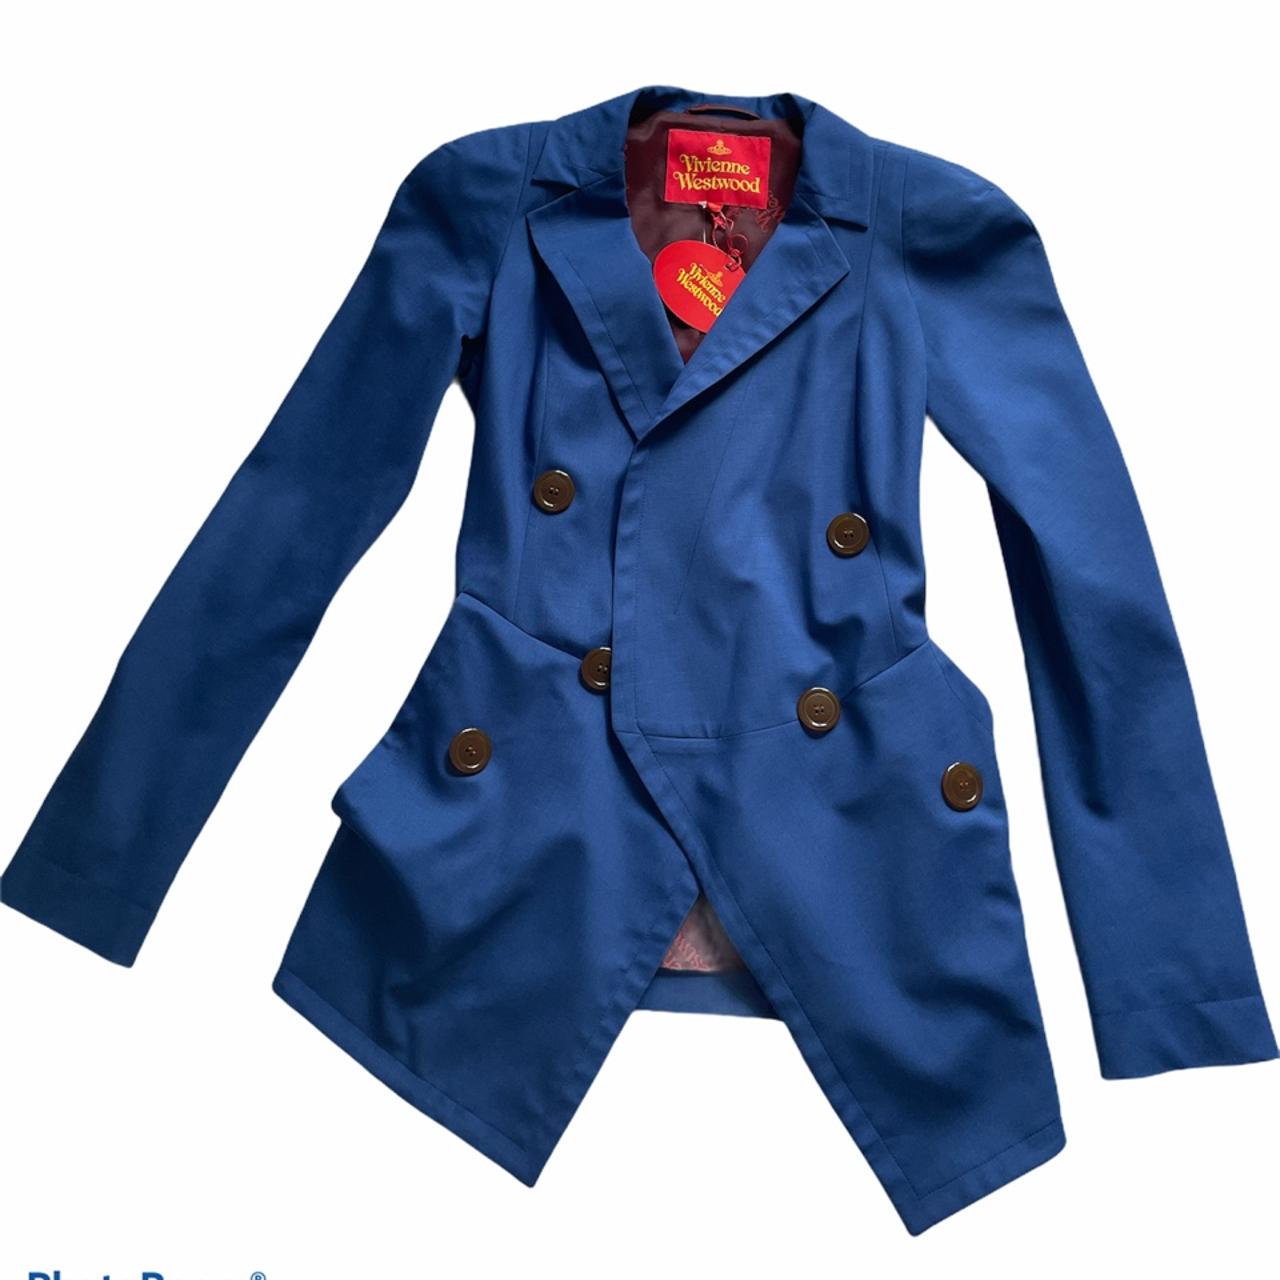 Vivienne Westwood Women's Blue and Red Jacket